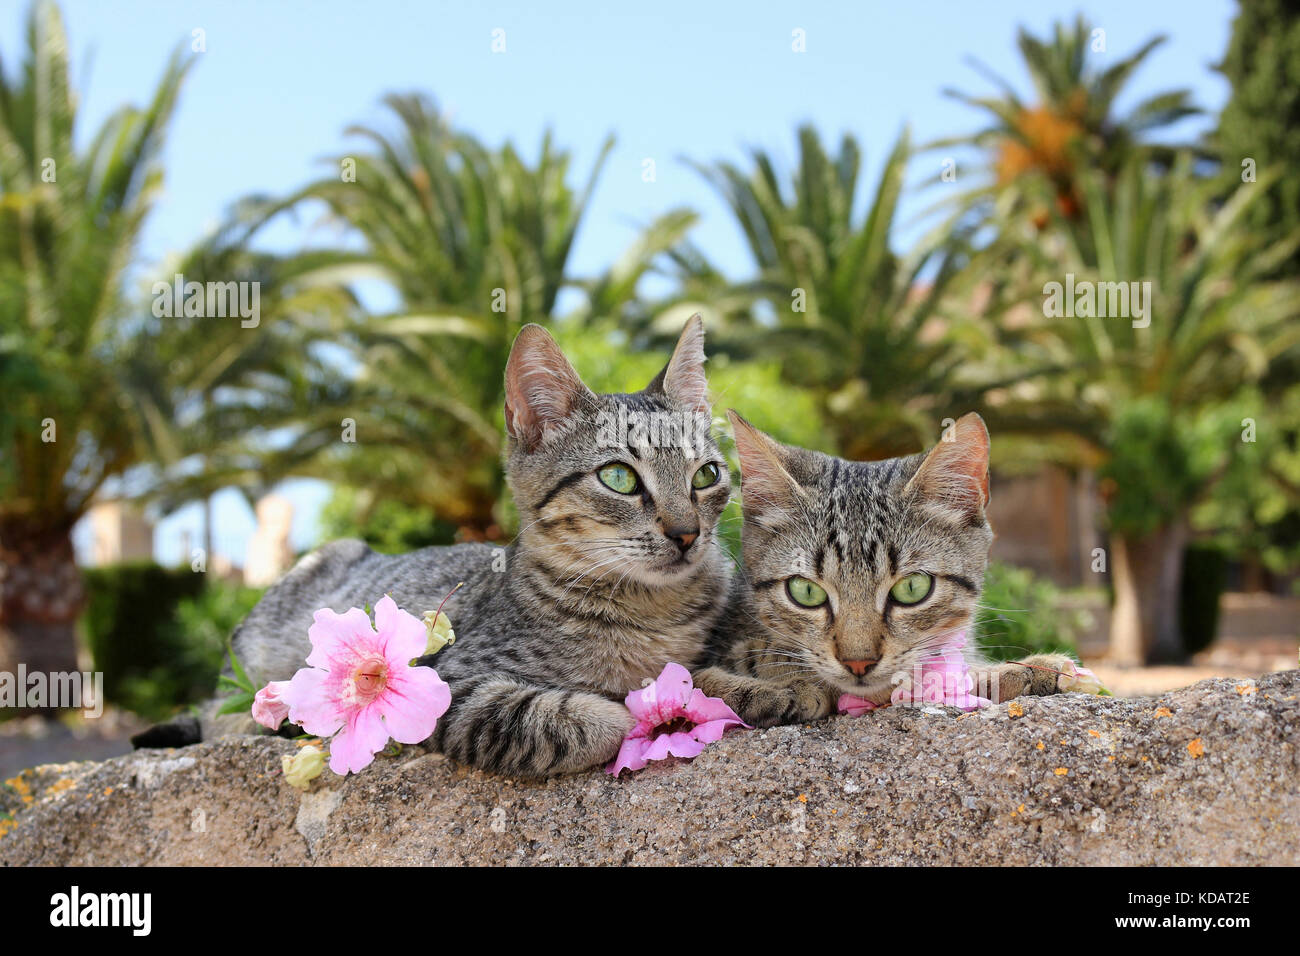 two young cats, black tabby, lying on a wall in front of palms Stock Photo